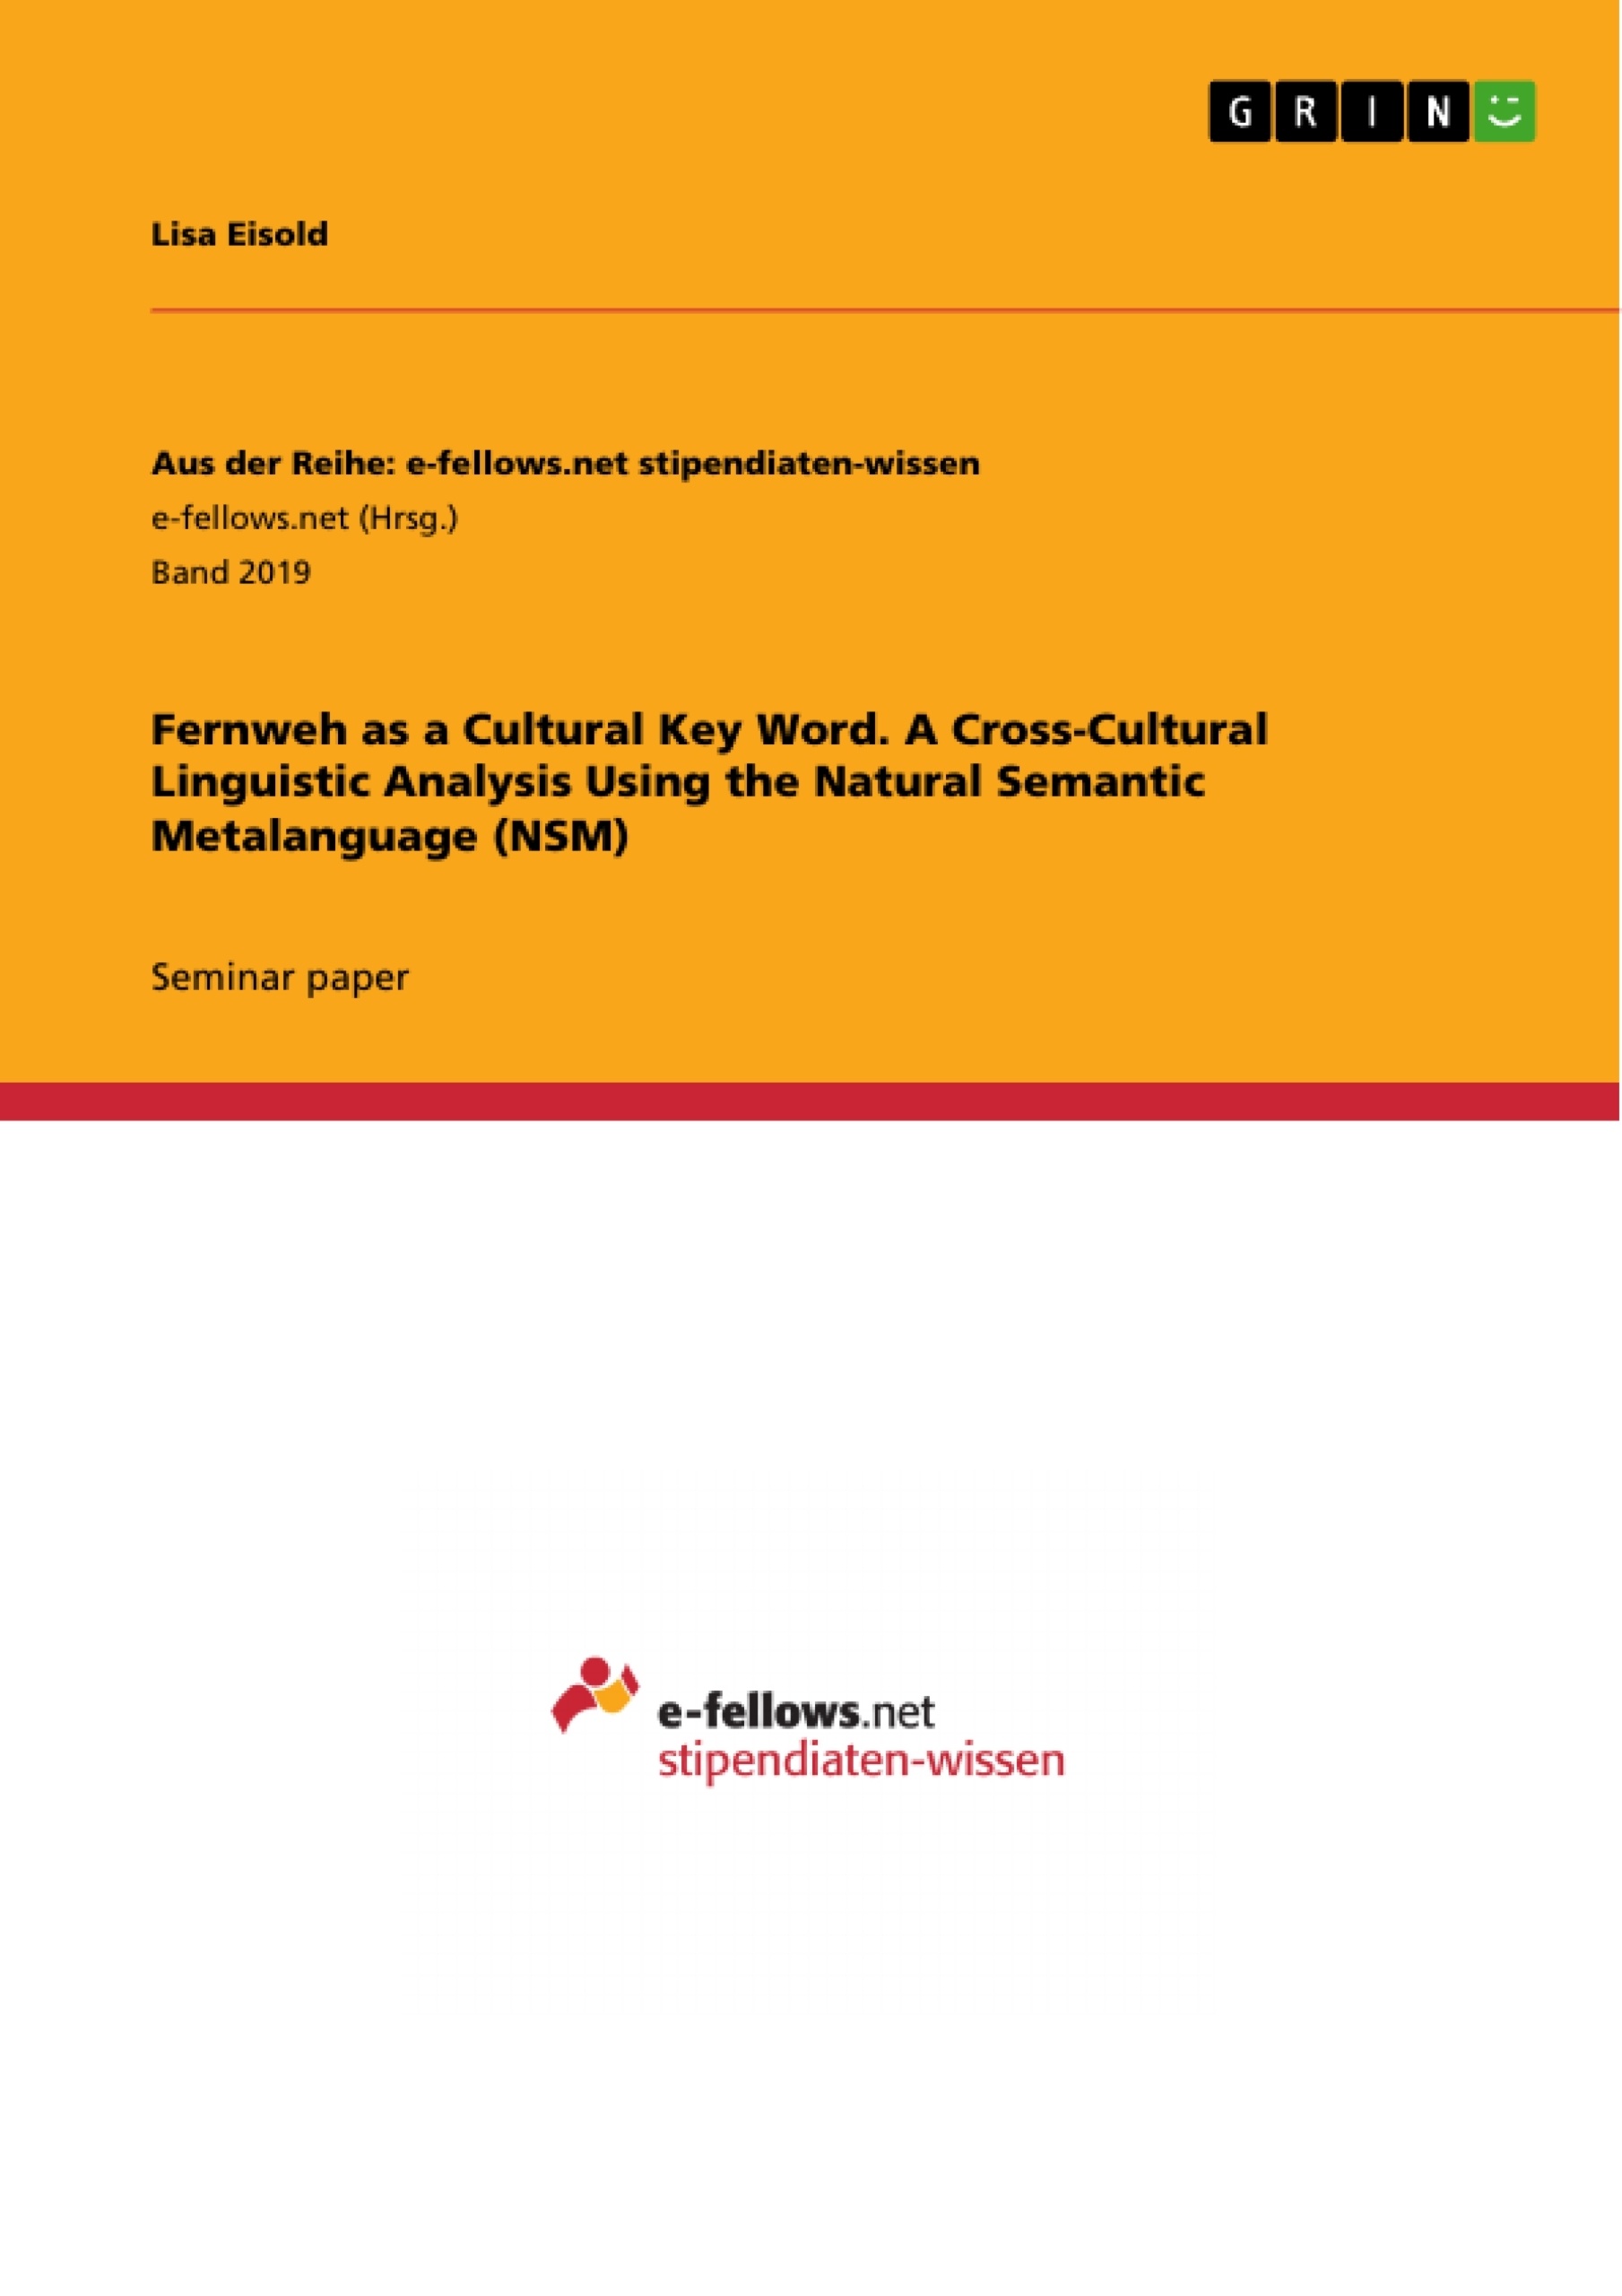 Título: Fernweh as a Cultural Key Word. A Cross-Cultural Linguistic Analysis Using the Natural Semantic Metalanguage (NSM)